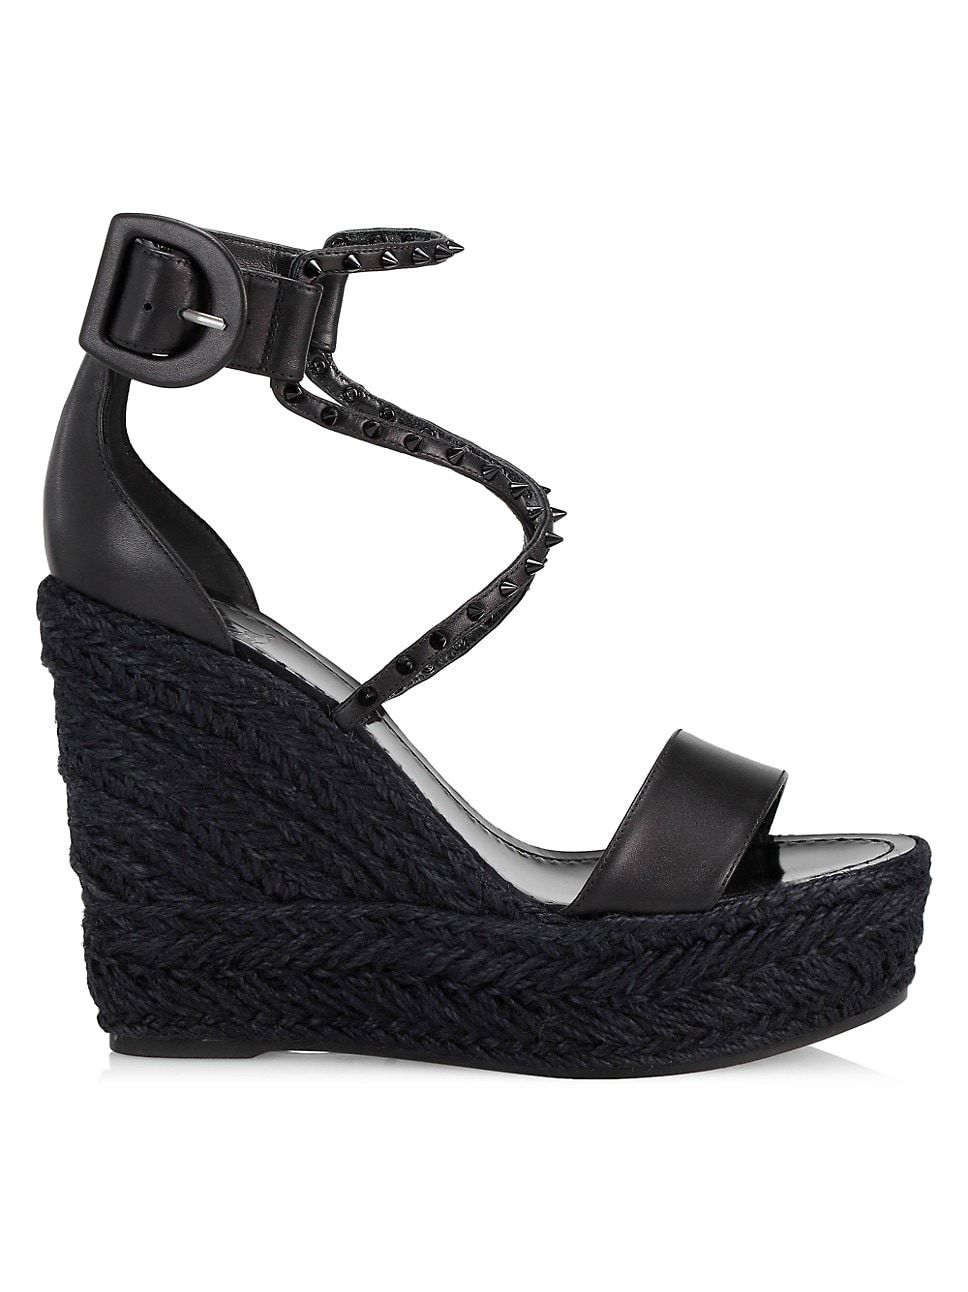 Chocazeppa Spikes 120 Leather Wedge Sandals | Saks Fifth Avenue